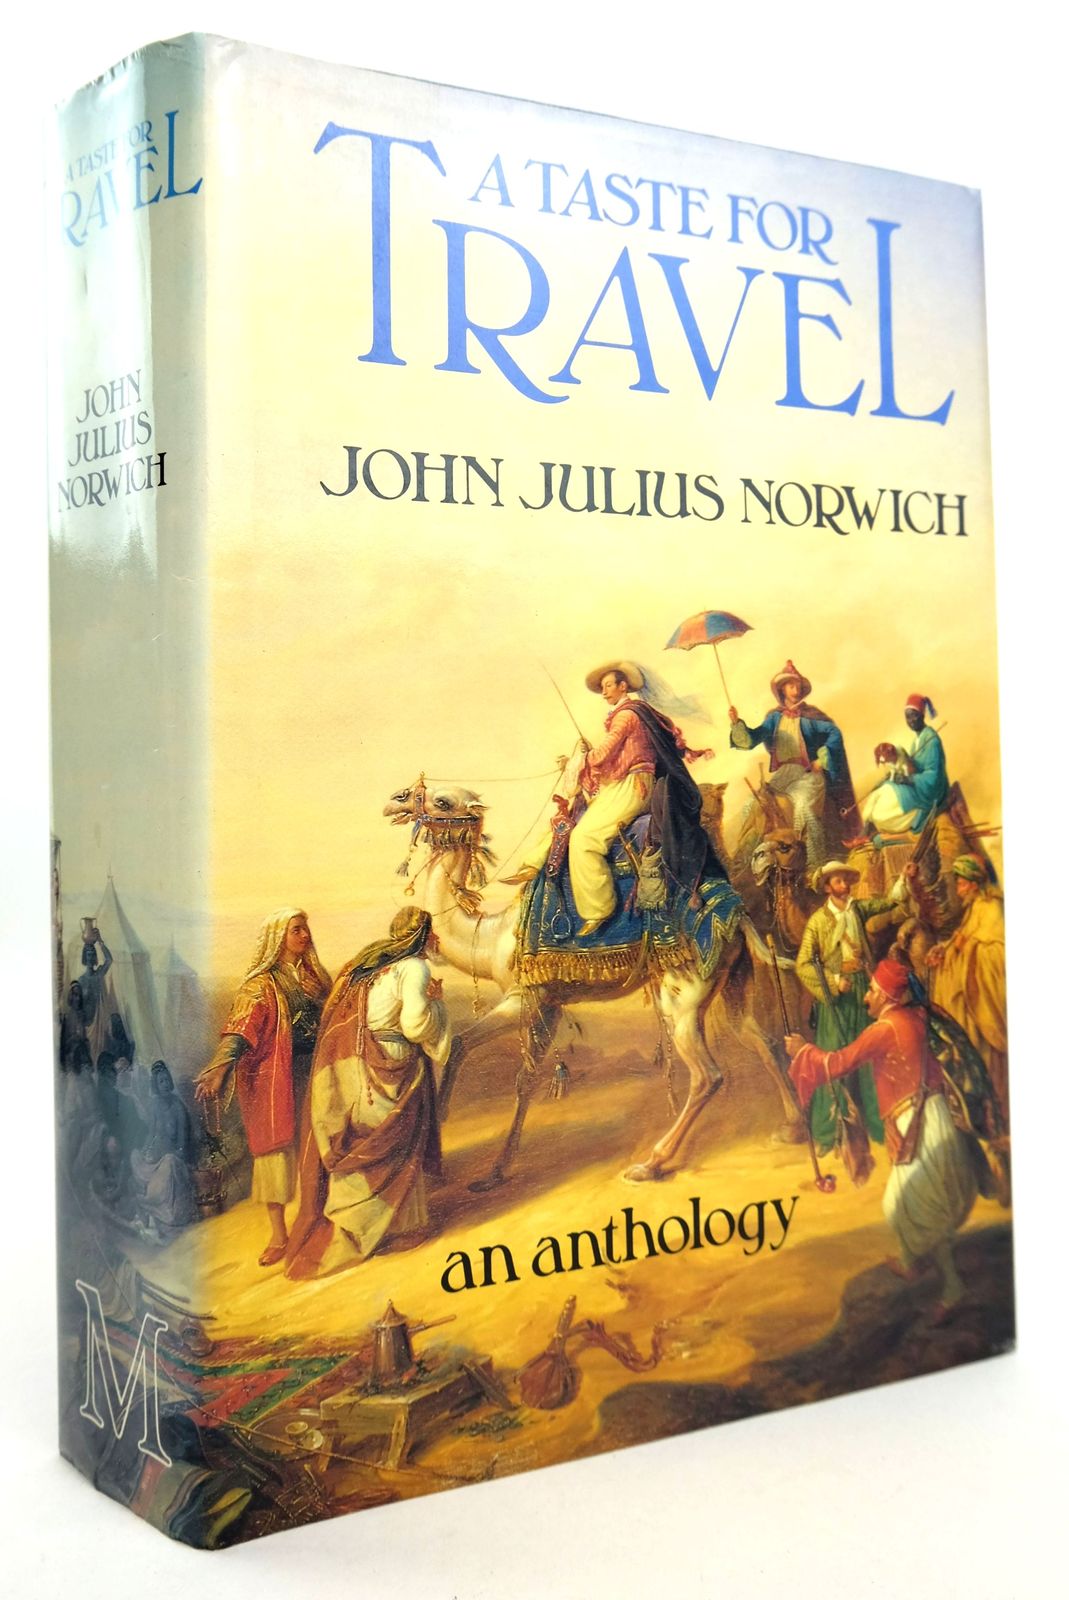 Photo of A TASTE FOR TRAVEL written by Norwich, John Julius published by MacMillan (STOCK CODE: 1819058)  for sale by Stella & Rose's Books